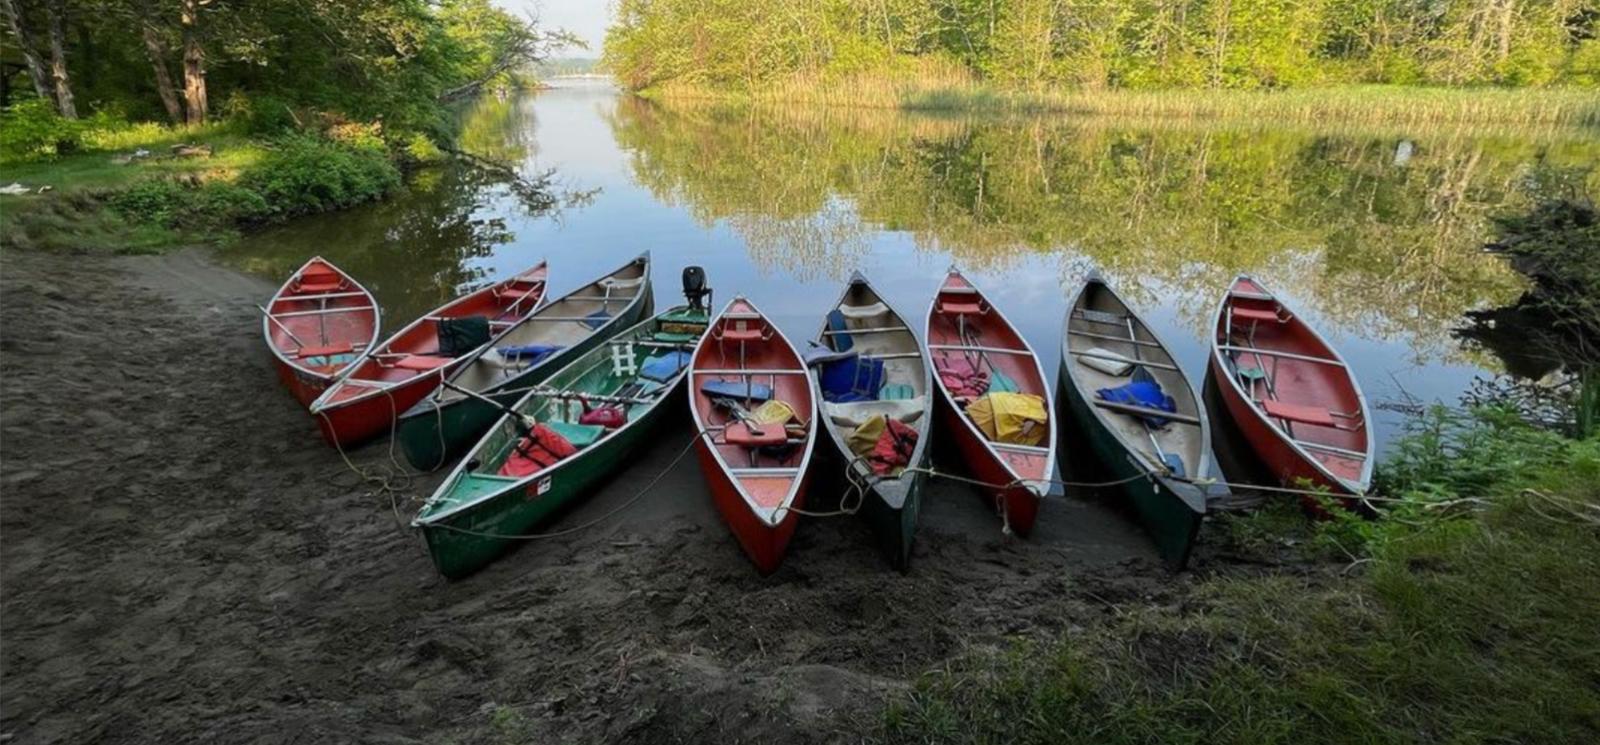 Canoes parked on the shore of the lake (Instagram@rookie1848)